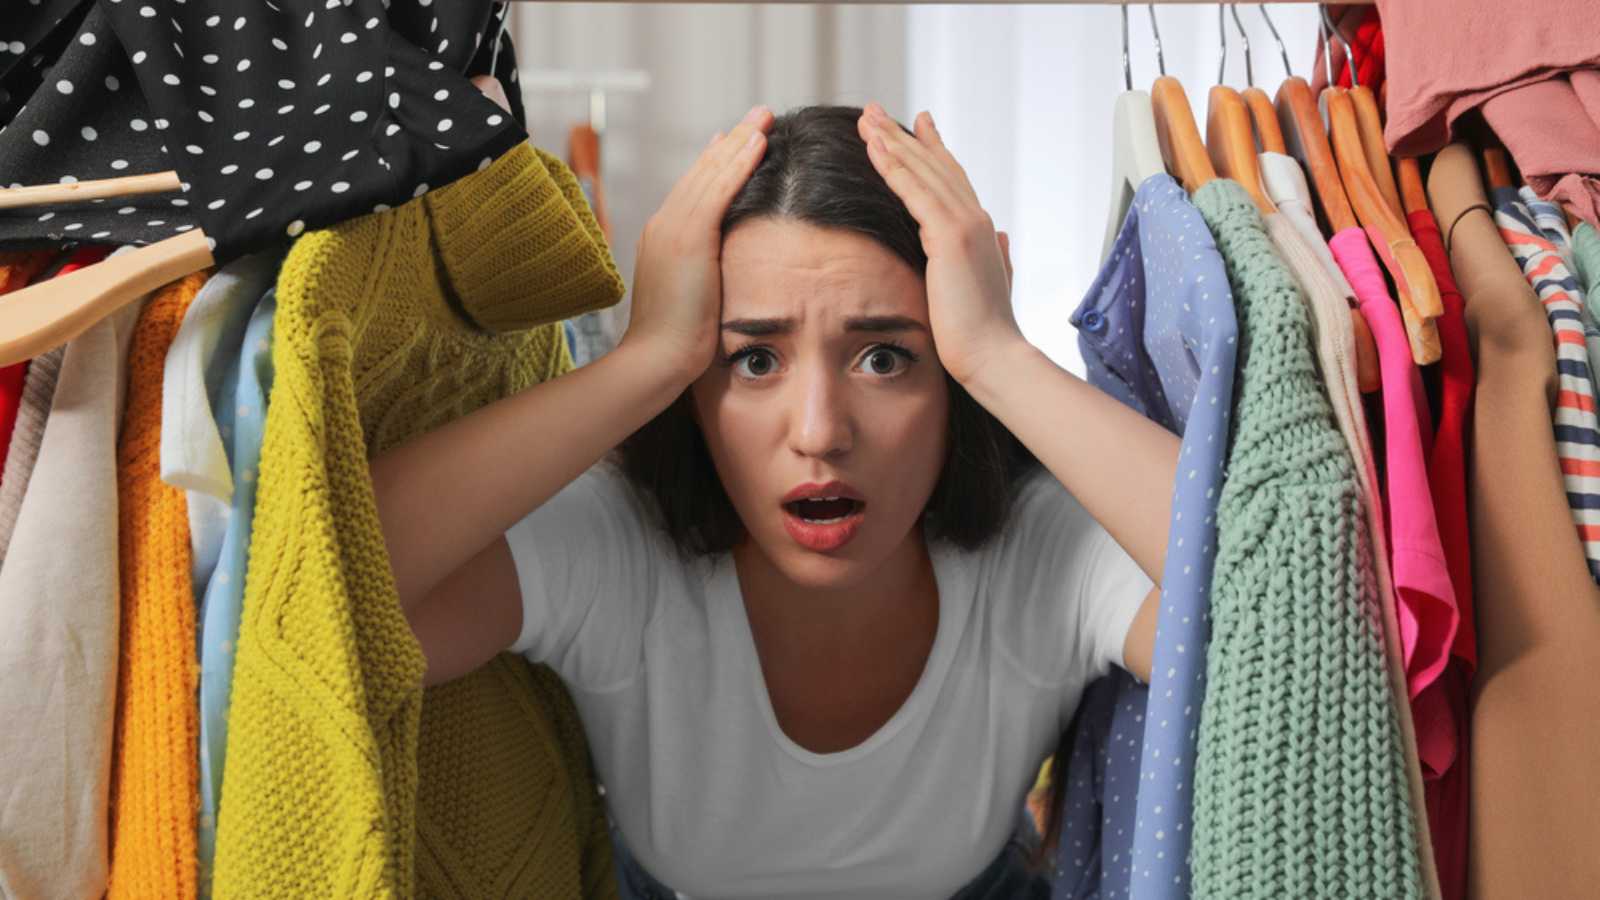 Upset young woman with lots of clothes